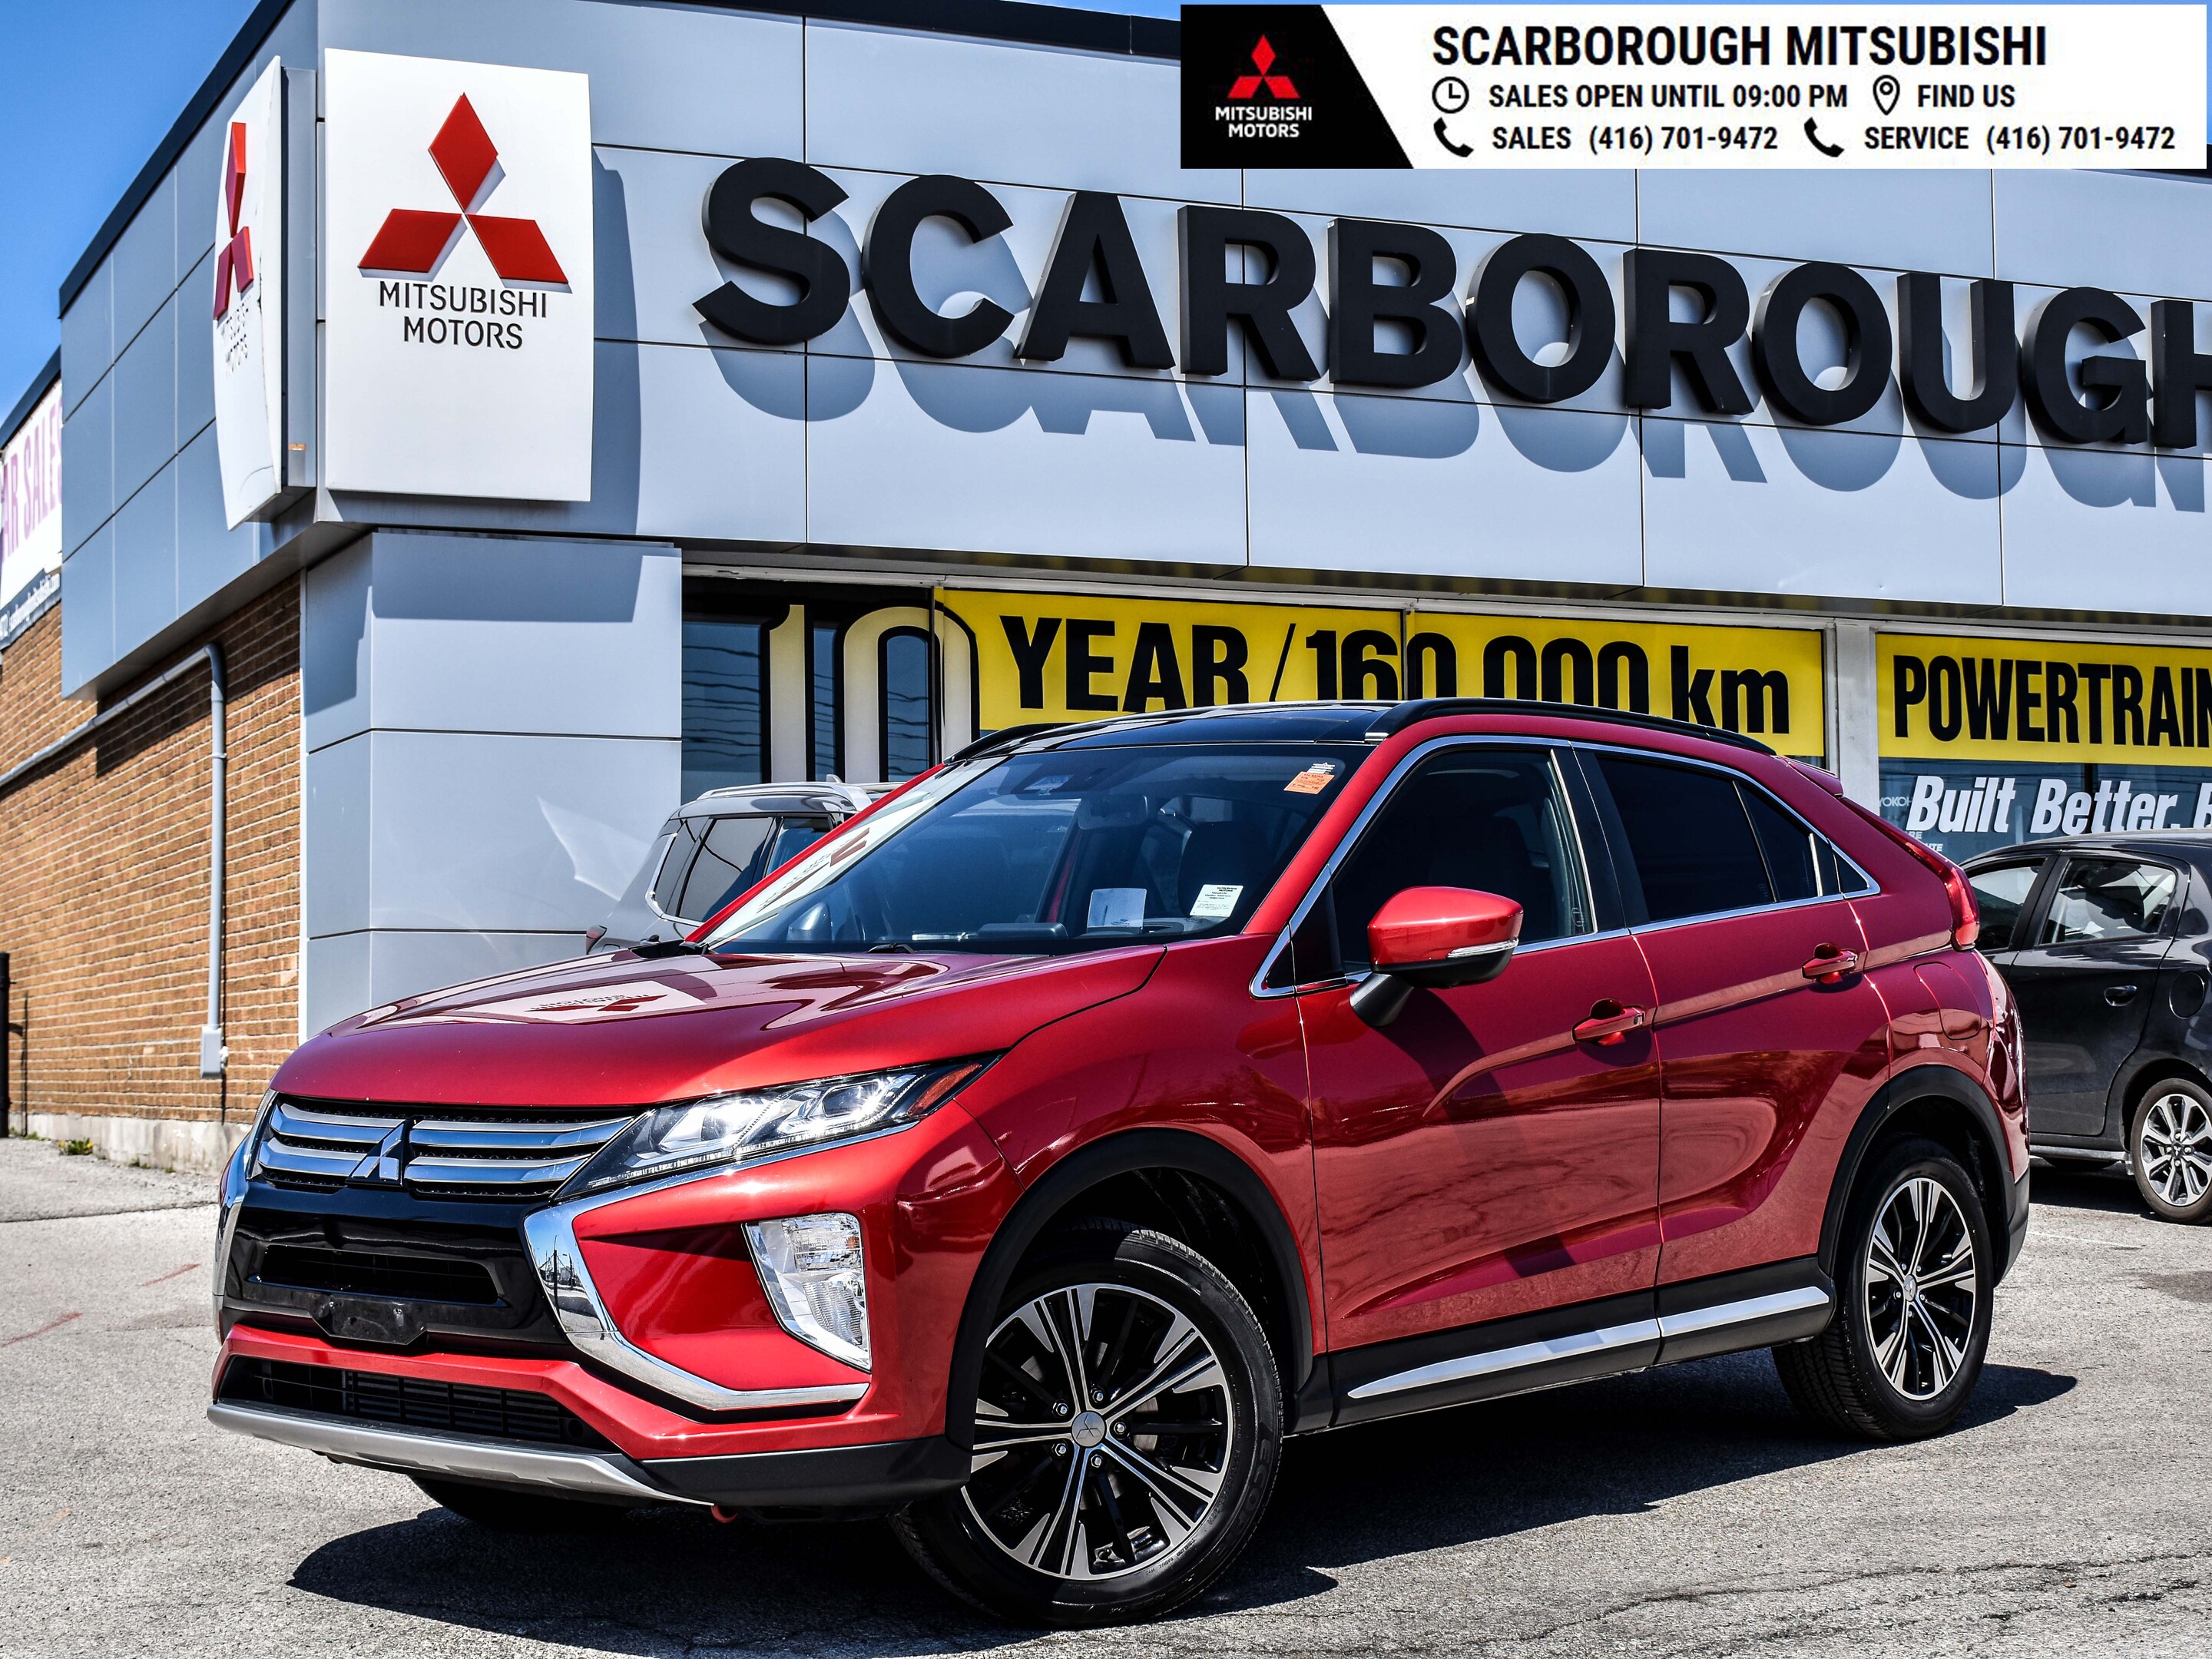 2018 Mitsubishi Eclipse Cross GT Awc Panoramic glass roof leather seats  